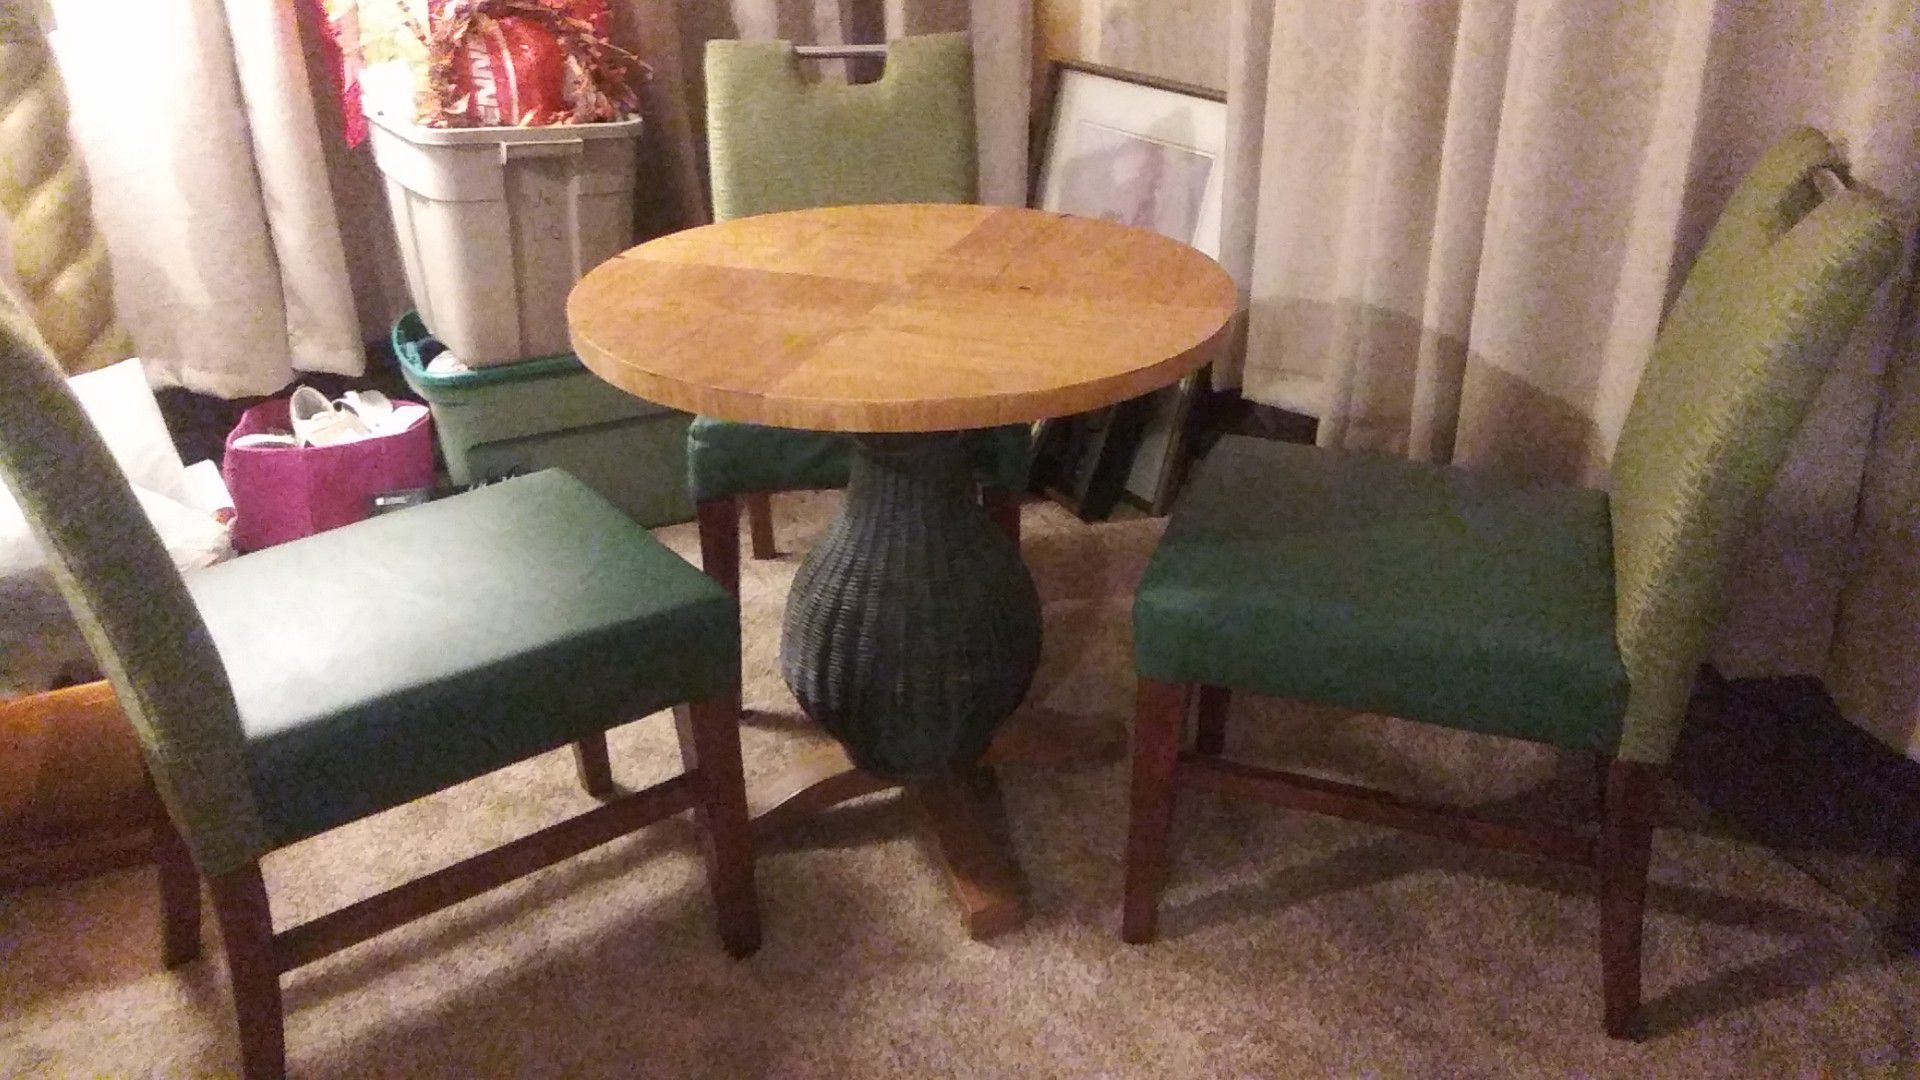 Table with 3 chairs